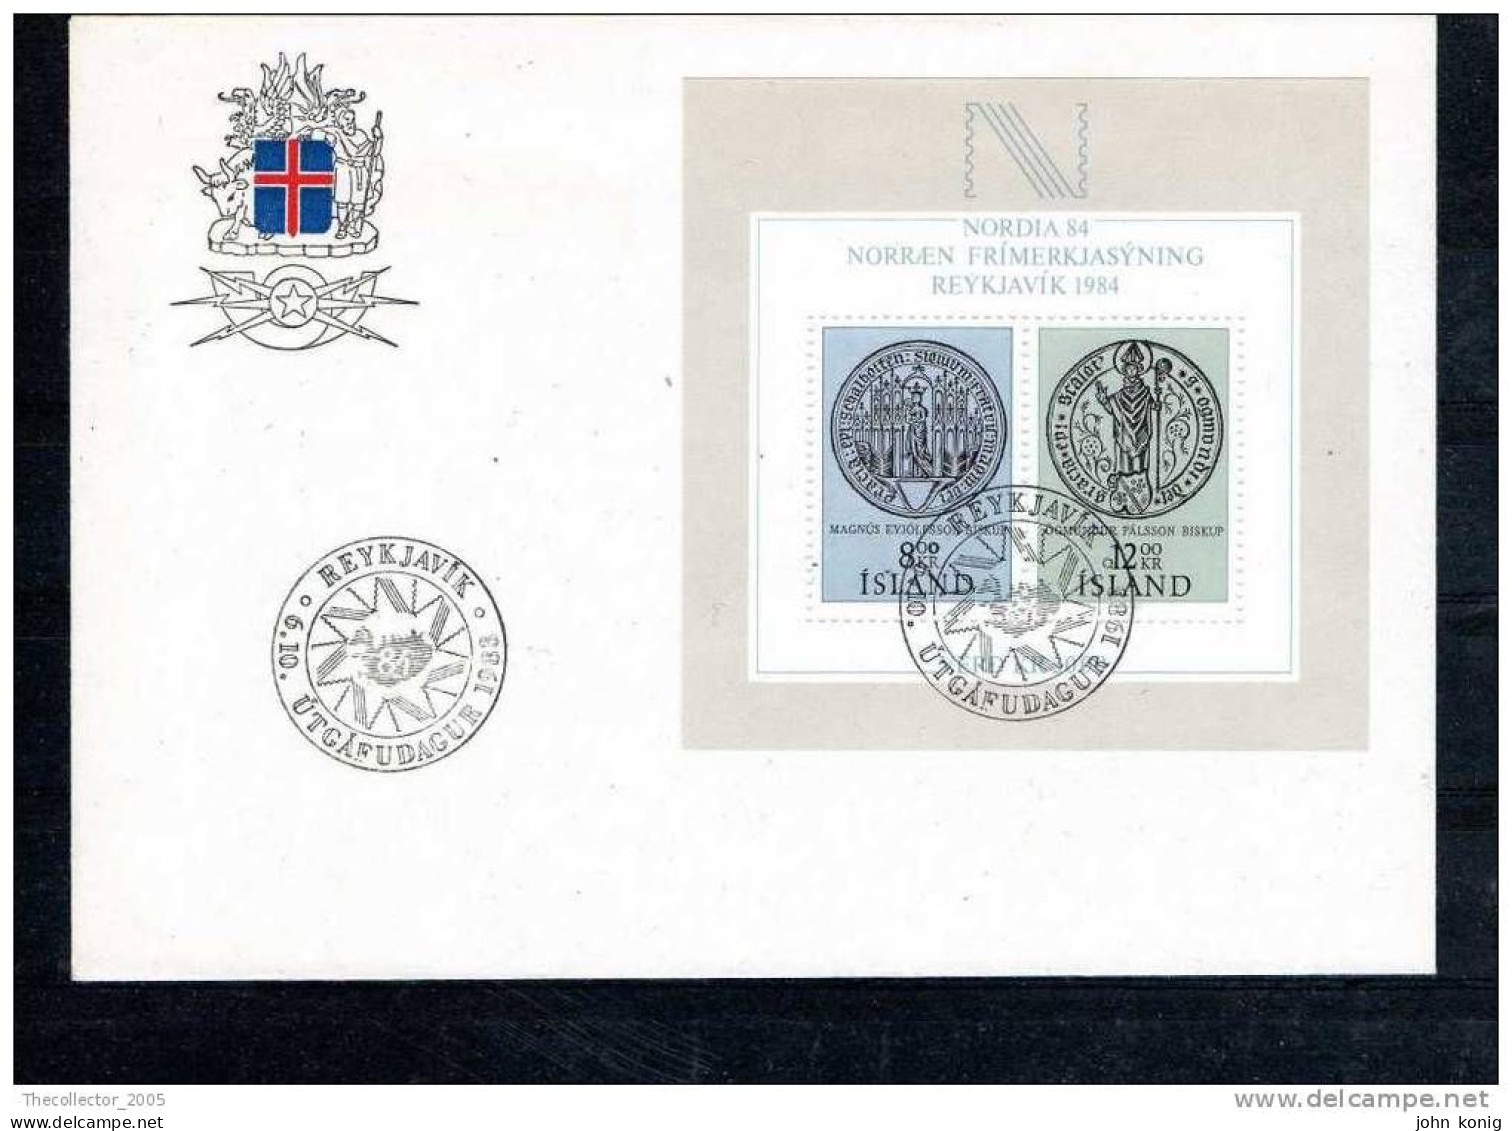 FDC - FIRST DAY COVER - ISLANDA - ICELAND - ISLAND - NORDIA 1984 - FDC